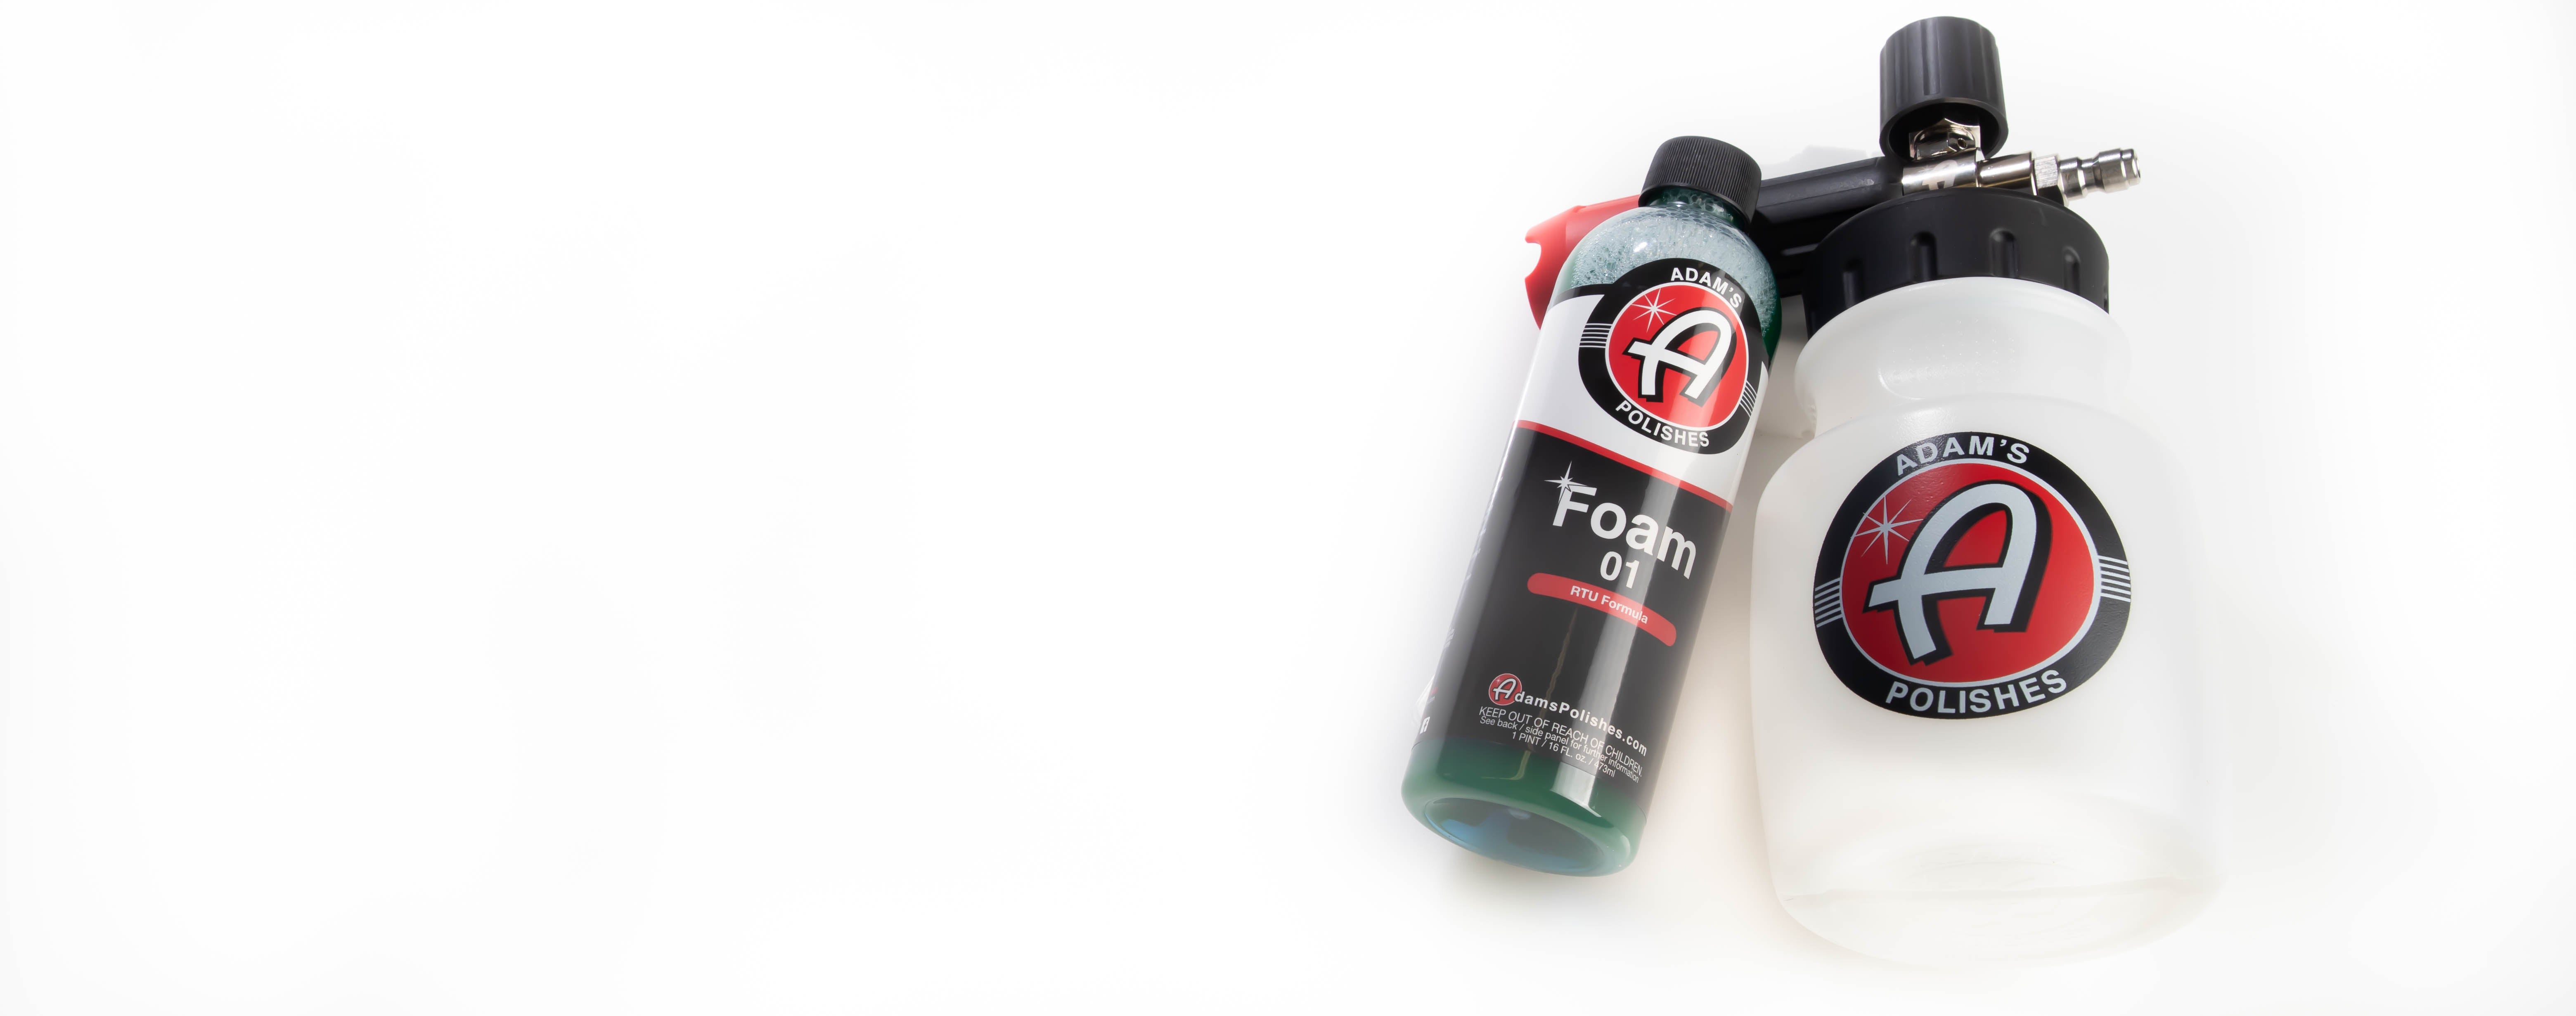 Adam's Polishes New Foam Cannon! - Product Polls, Feedback, and